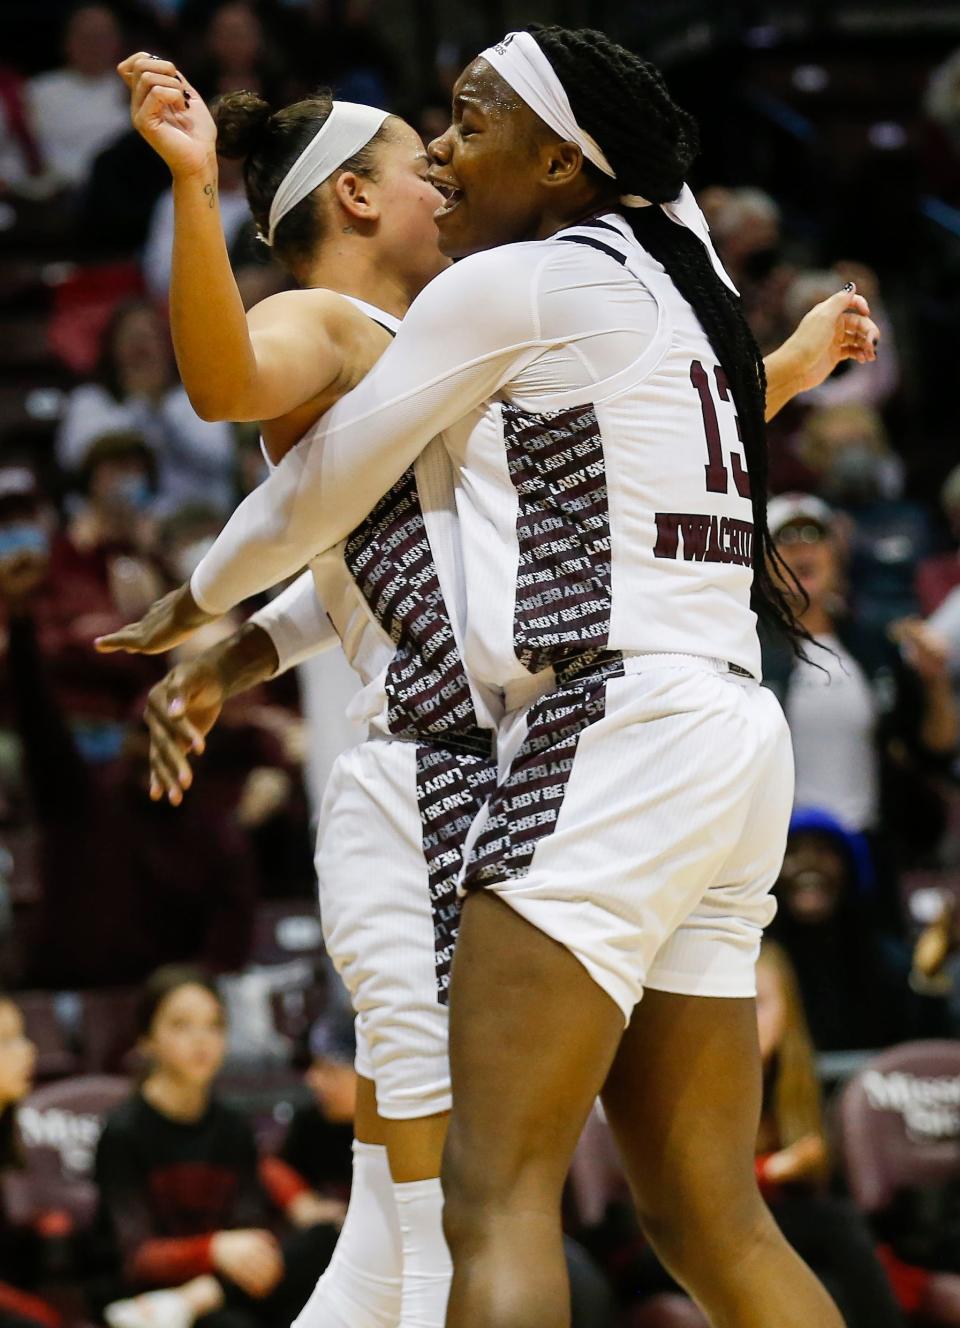 The Missouri State Lady Bears took on the Illinois State Redbirds at JQH Arena on Saturday, Jan. 22, 2022.